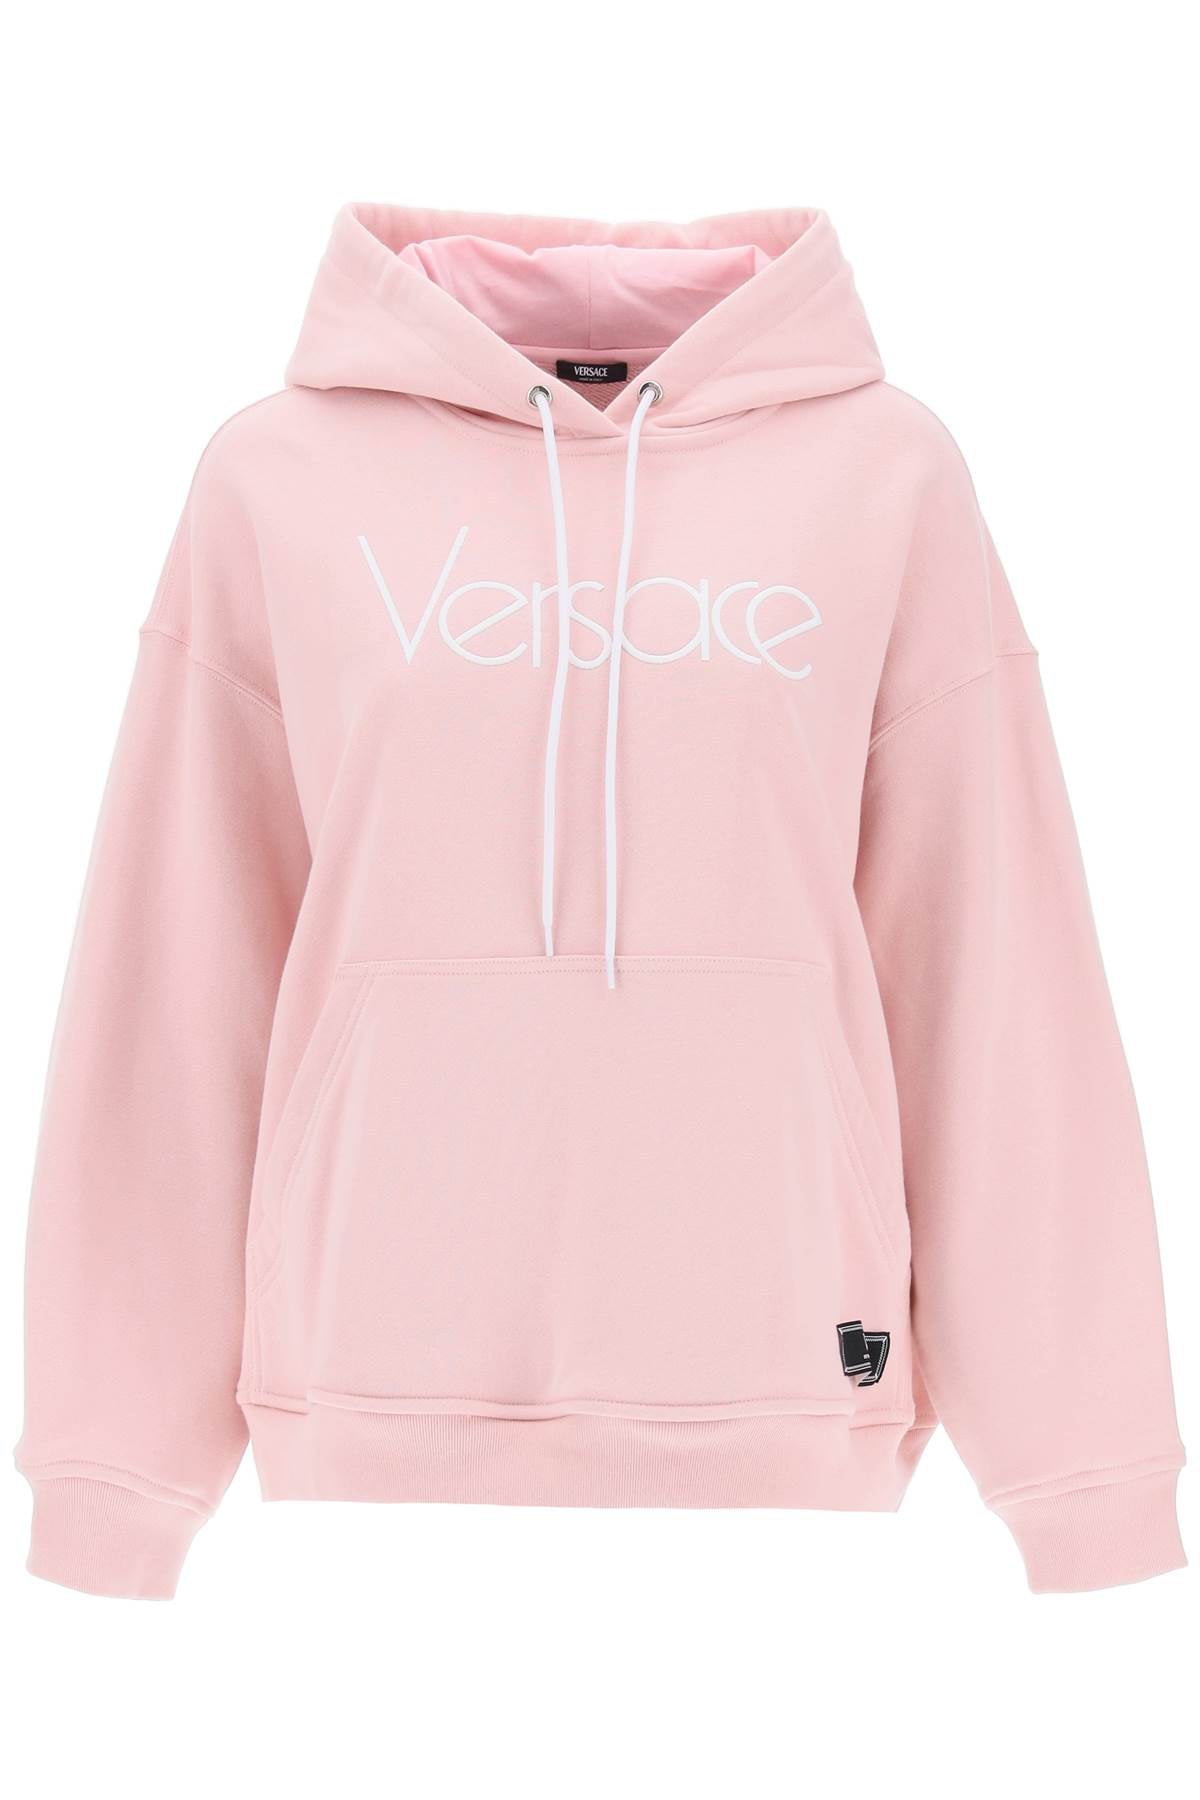 Versace Hoodie With 1978 Re-Edition Logo Pink